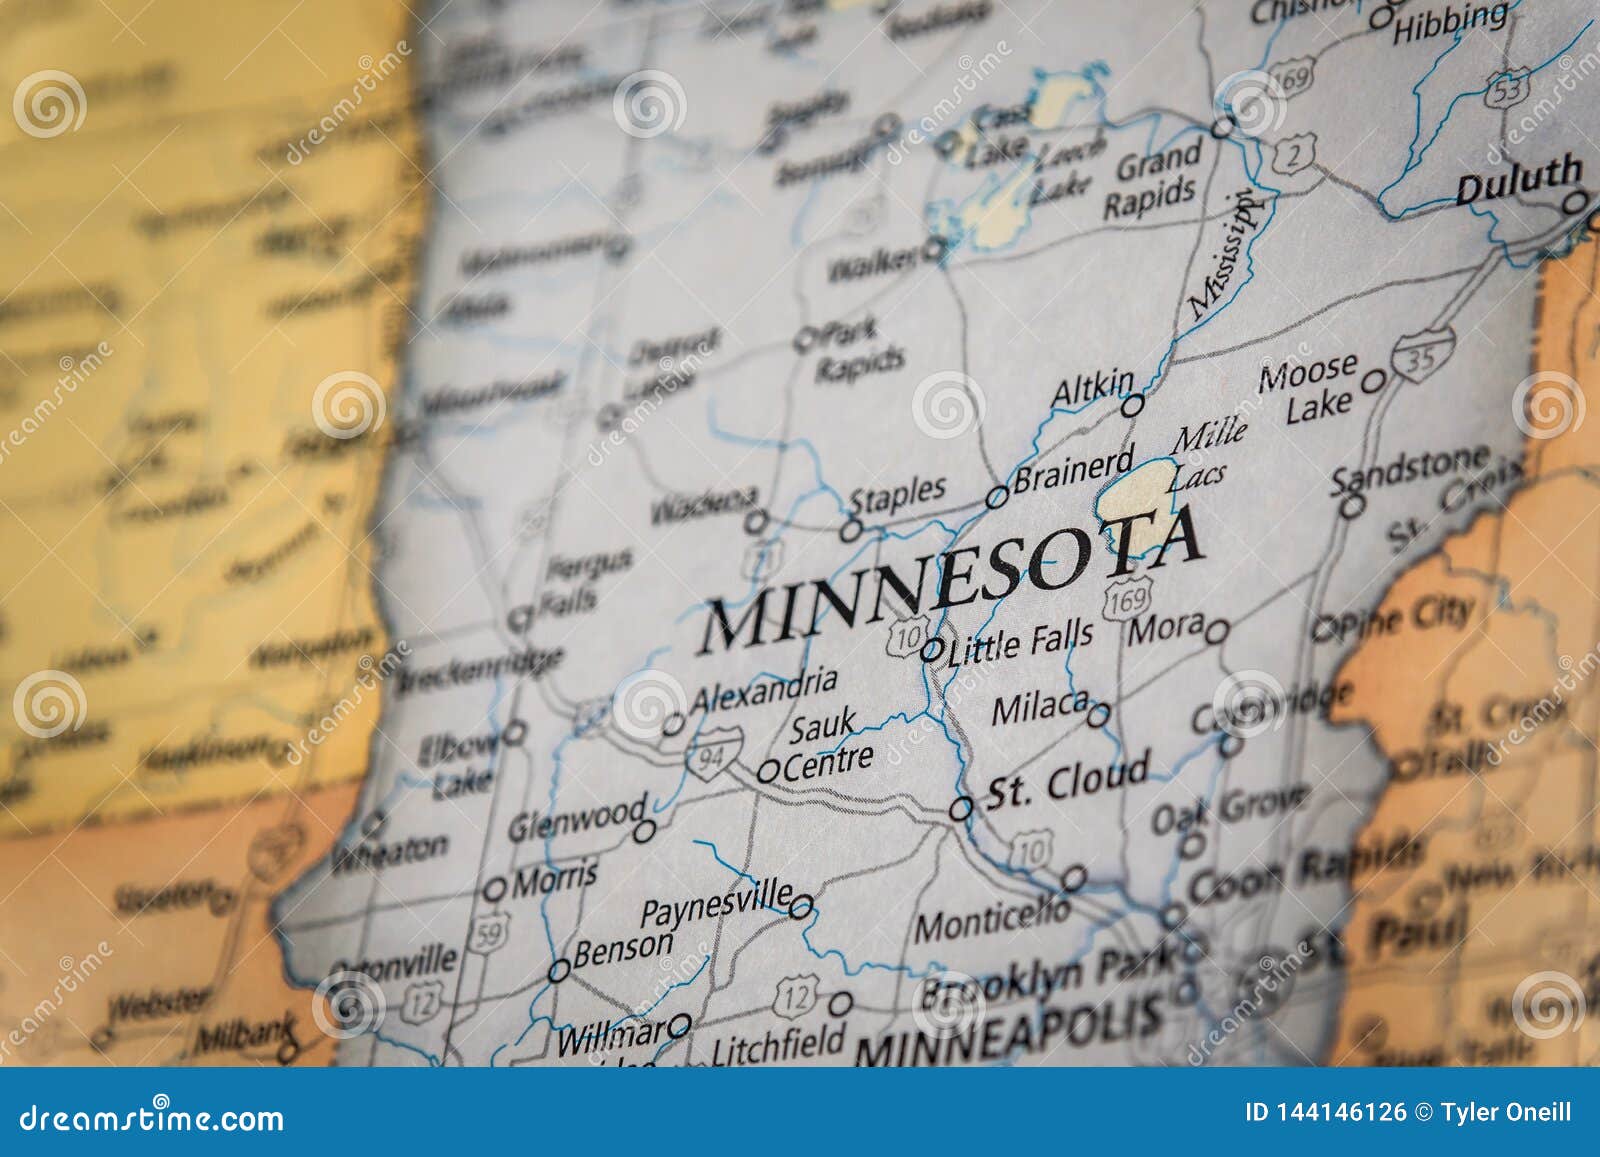 selective focus of minnesota state on a geographical and political state map of the usa